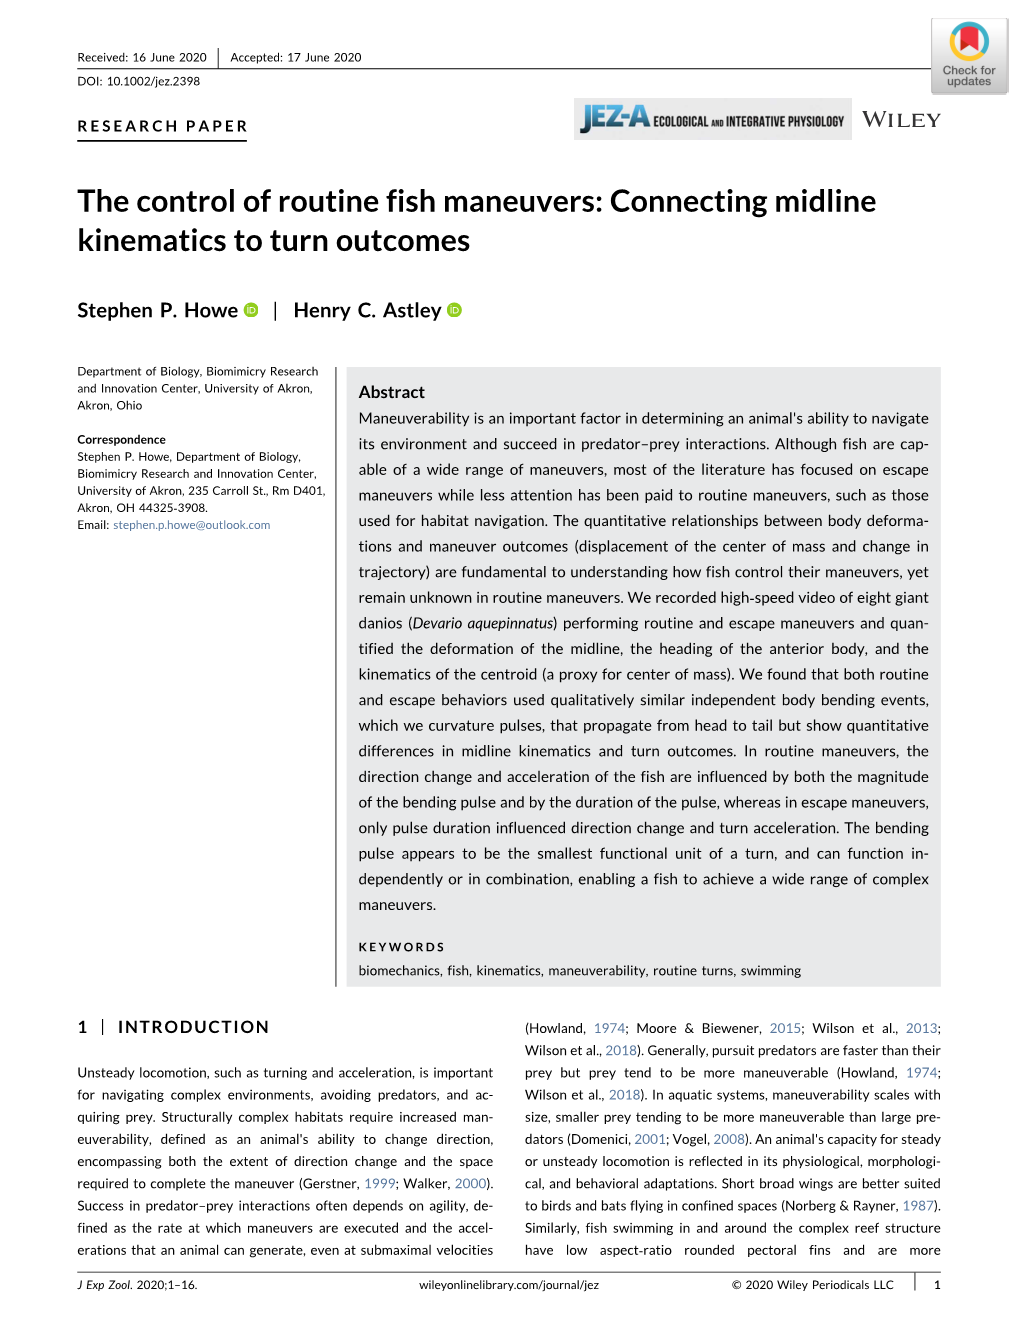 The Control of Routine Fish Maneuvers: Connecting Midline Kinematics to Turn Outcomes